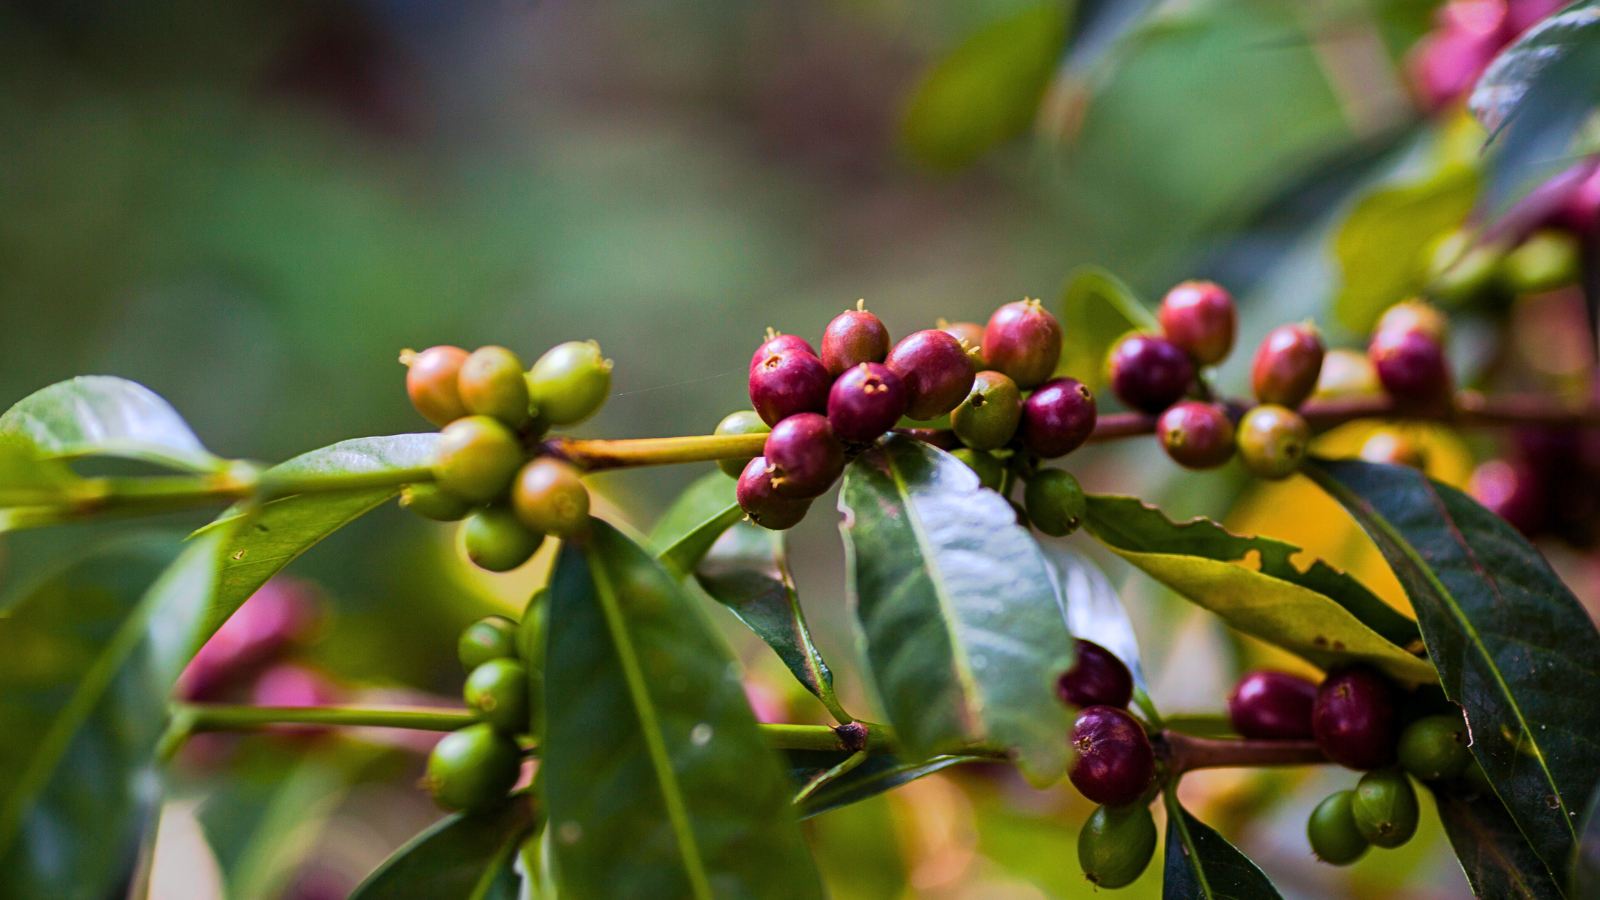 Forest-grown coffee cherries ripening in Ethiopia